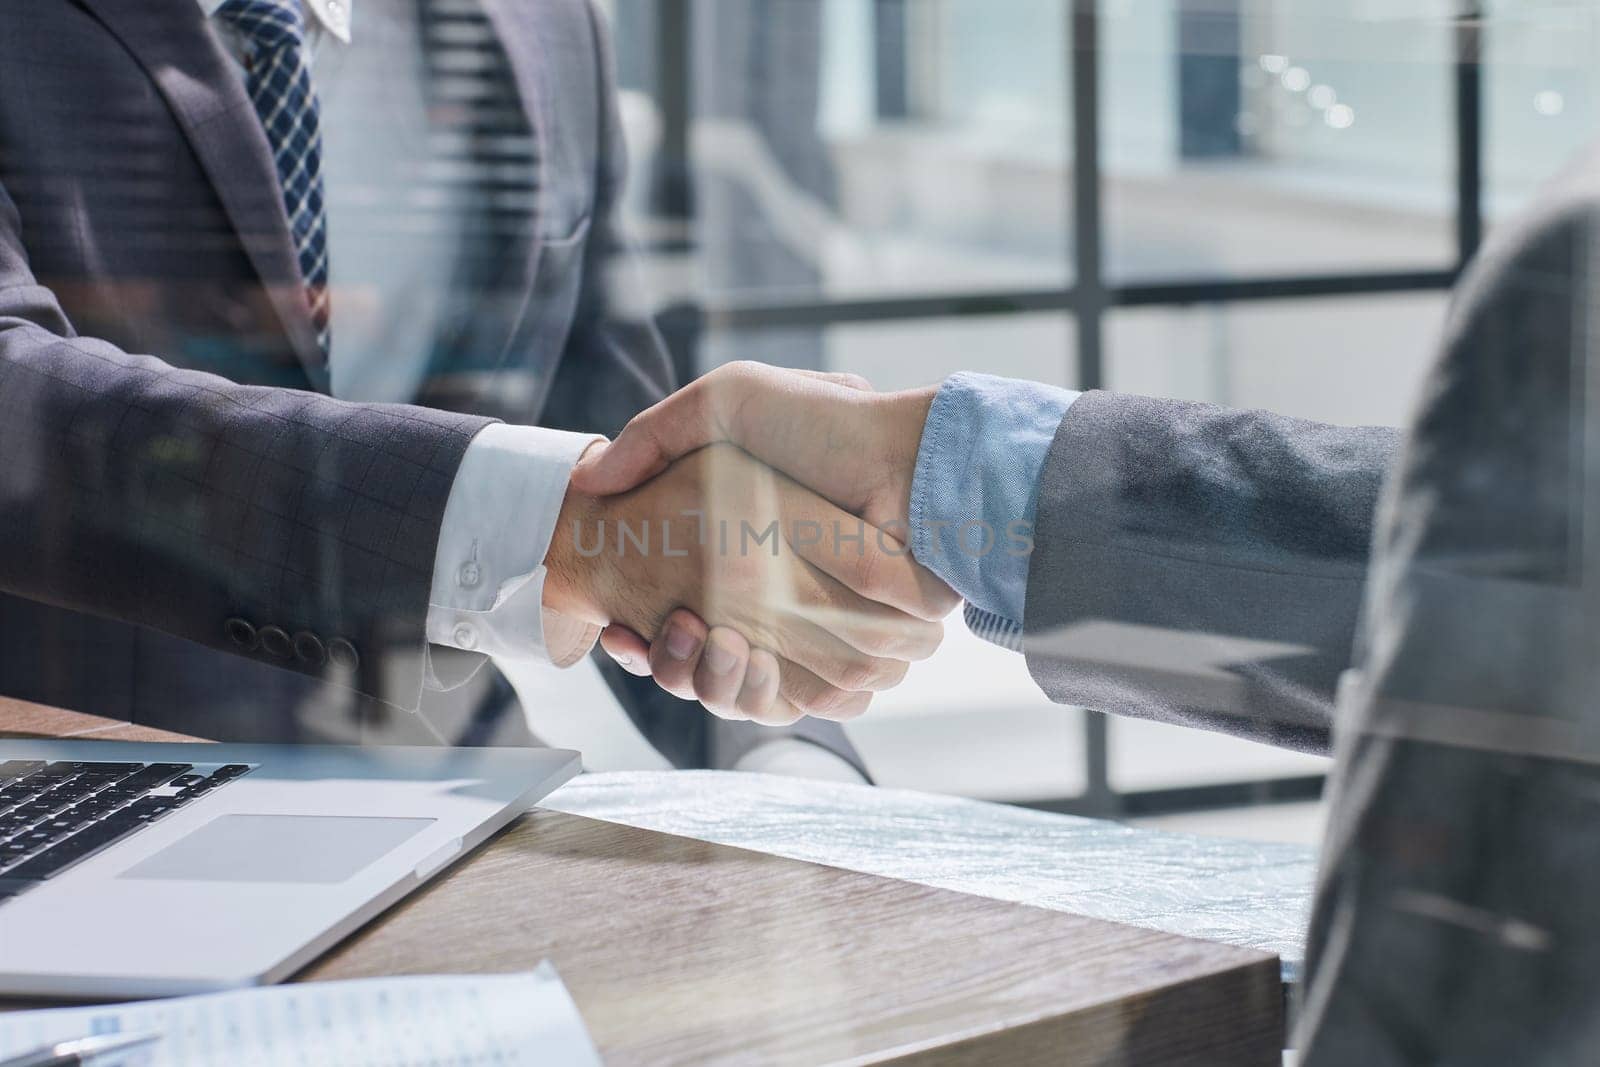 Businessman handshake for teamwork of business merger and acquisition by Prosto